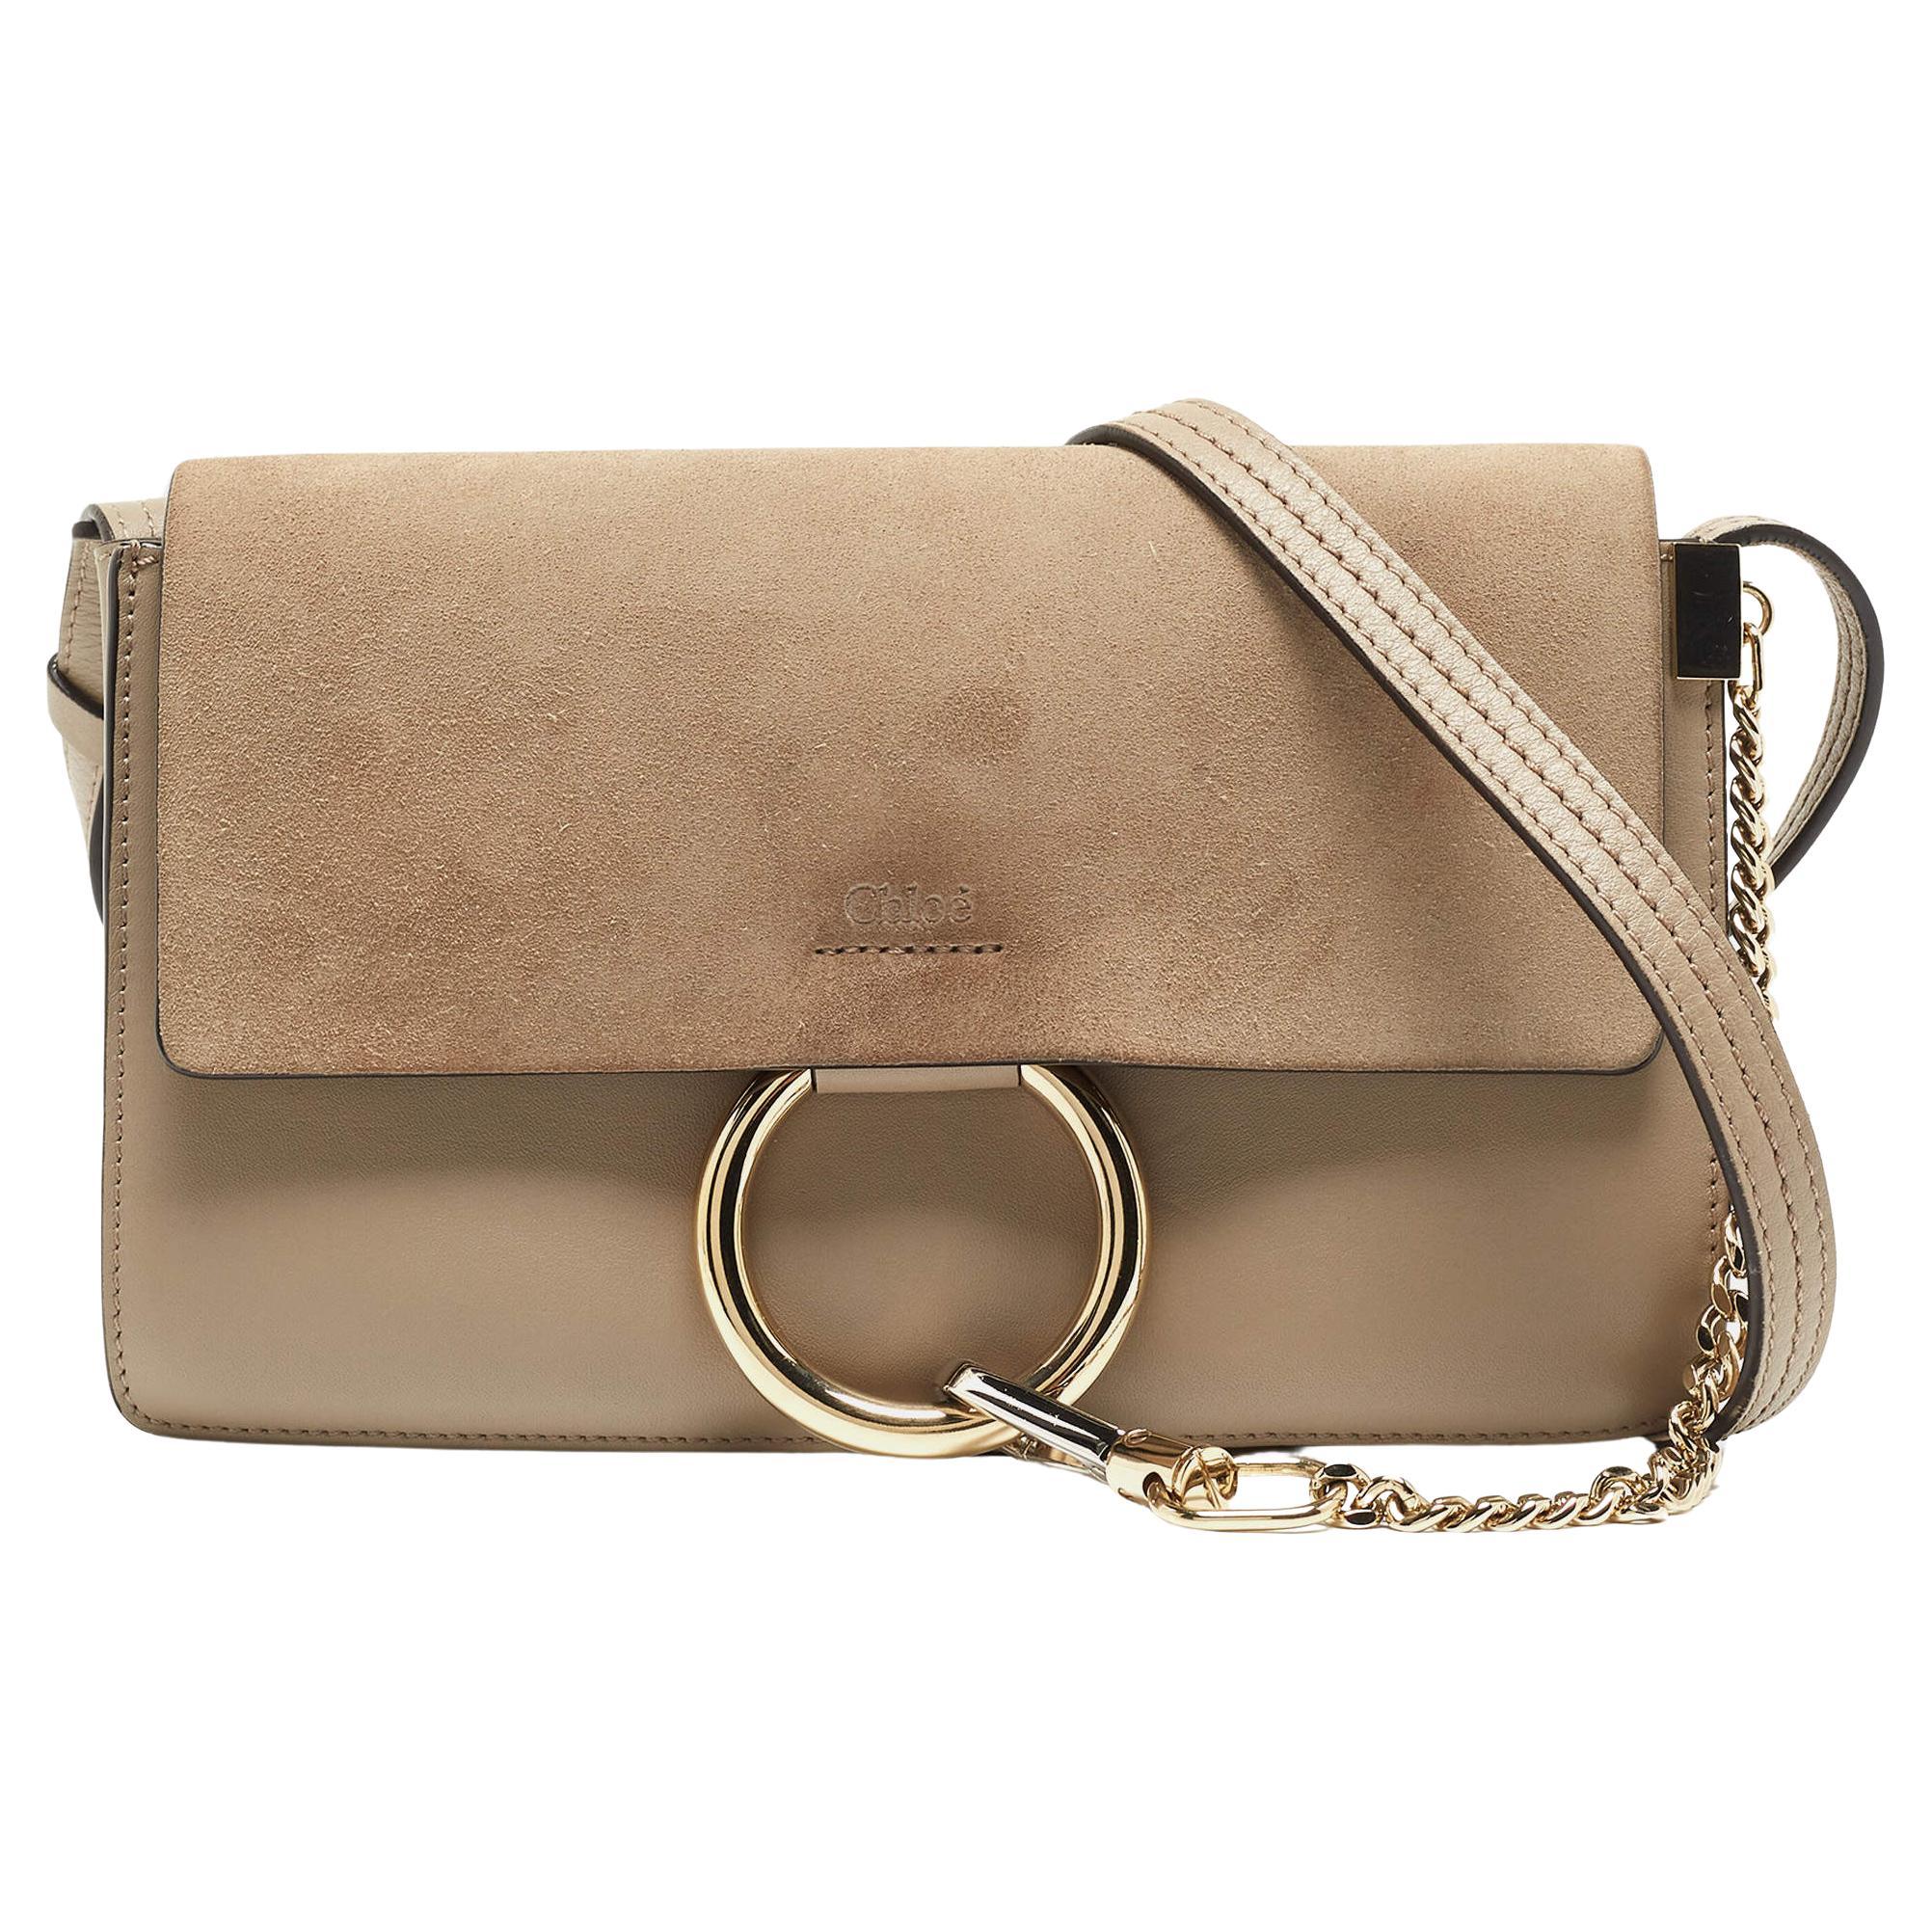 Chloe Taupe Leather and Suede Small Faye Shoulder Bag